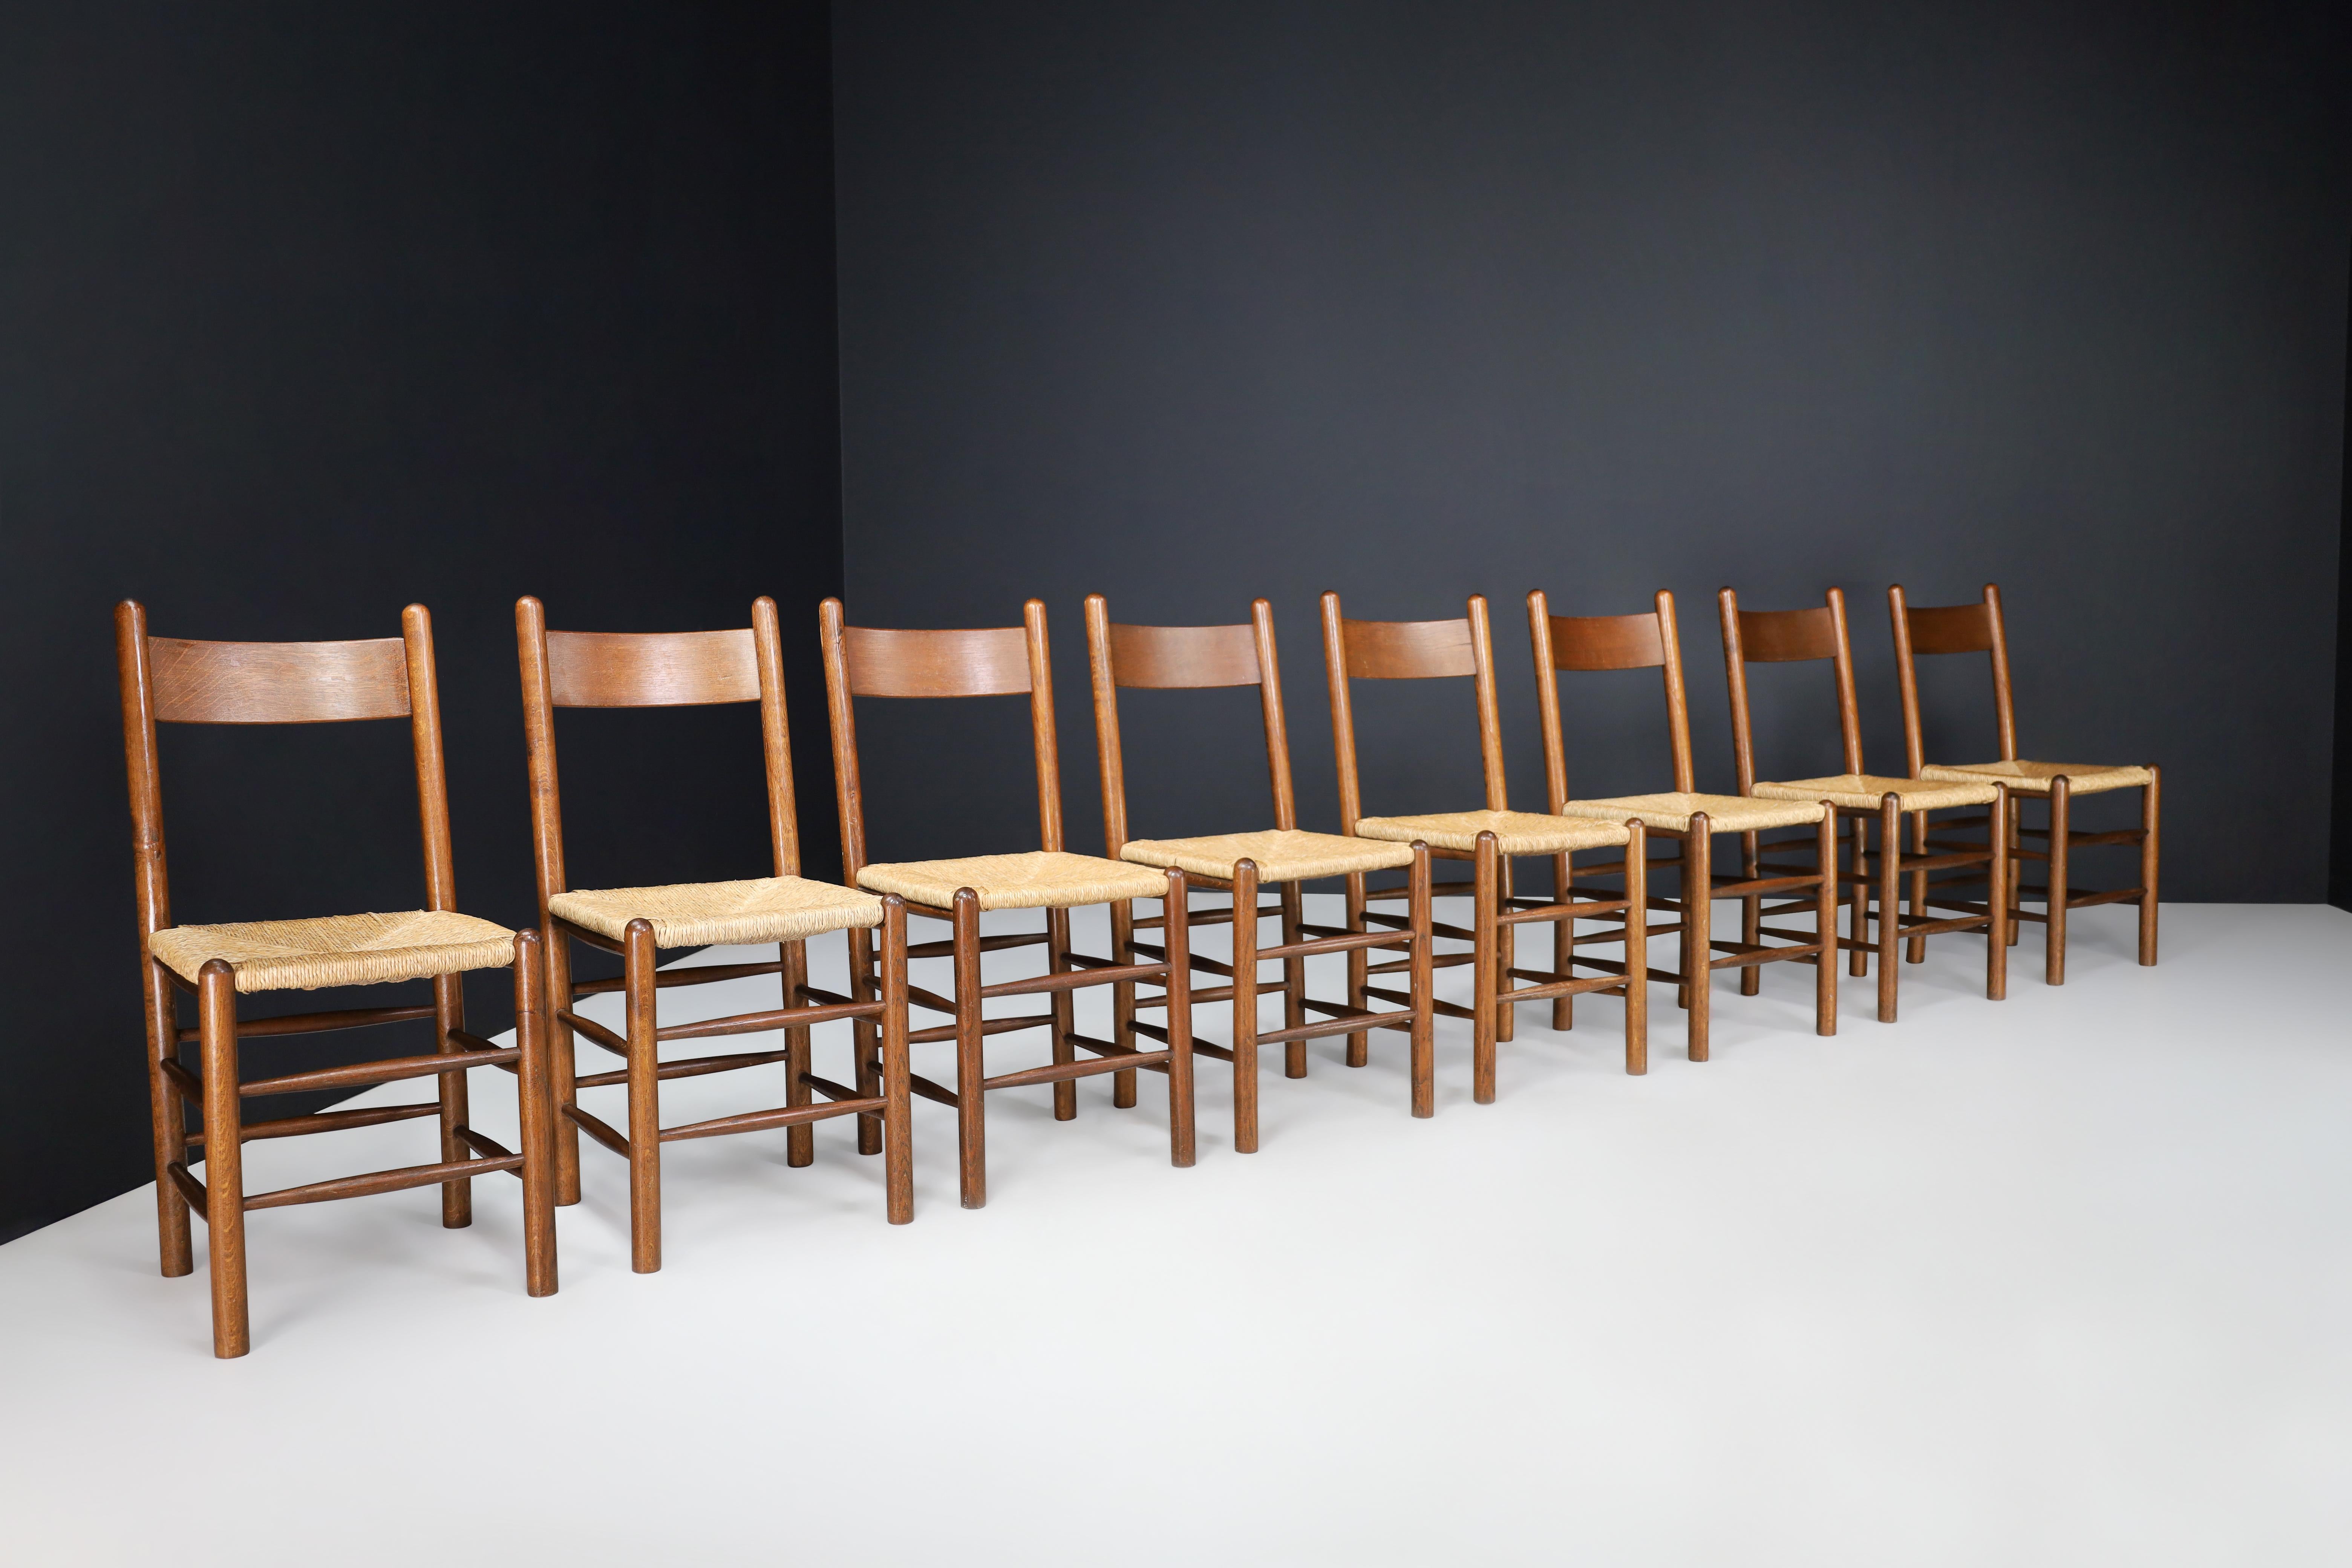 Charlotte Perriand Style Oak and Rush Dining Room Chairs, France, 1960s 

These 30 dining room chairs in the style of Charlotte Perriand are from France in the 1960s. Made from solid French oak and rush, they showcase a natural patina and are in